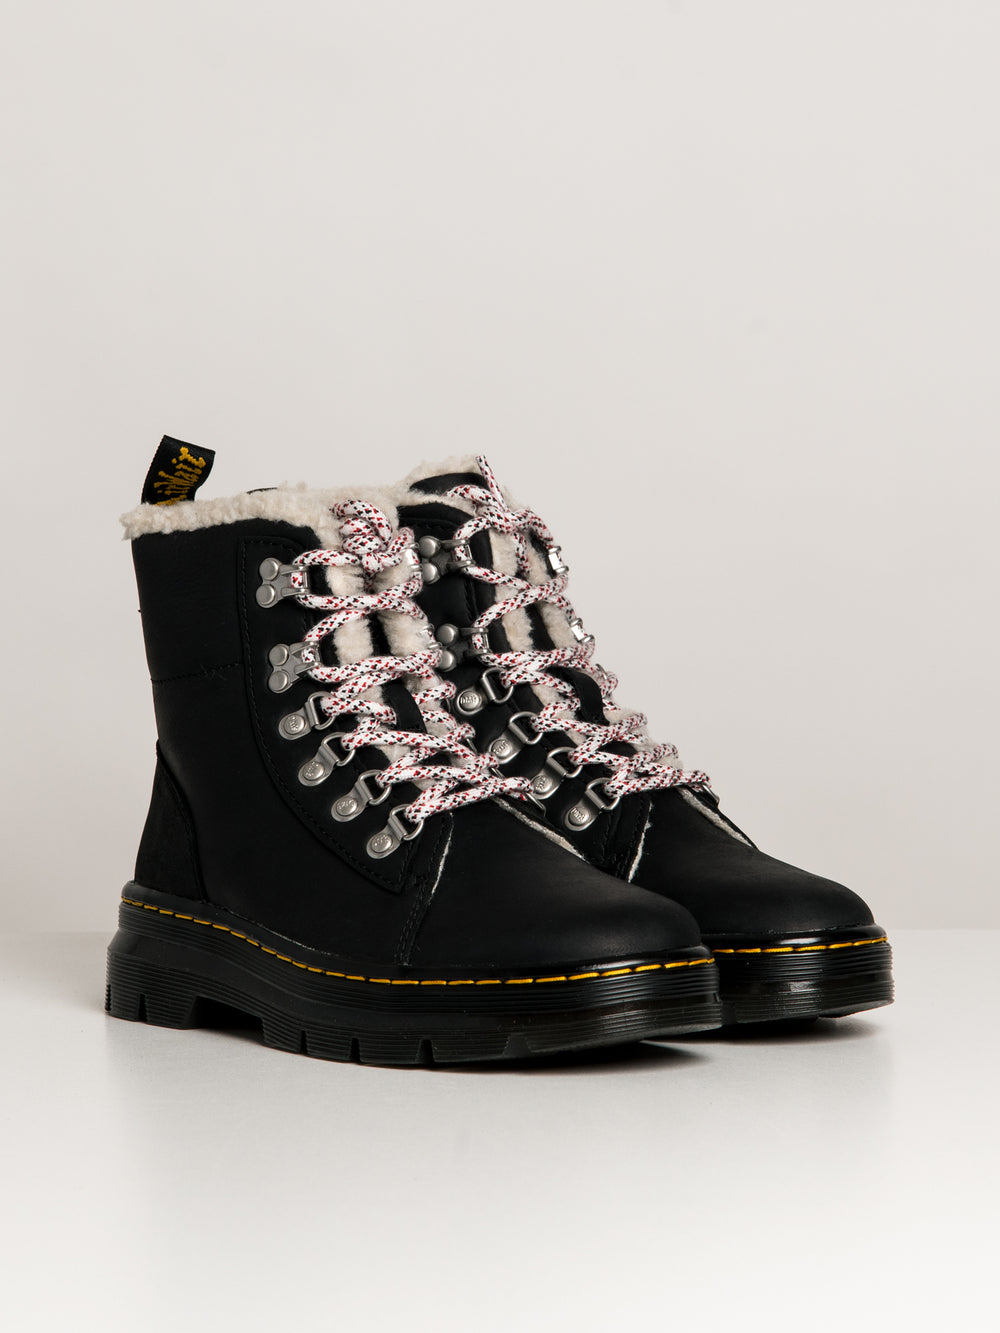 WOMENS DR MARTENS COMBS WYOMING BOOT